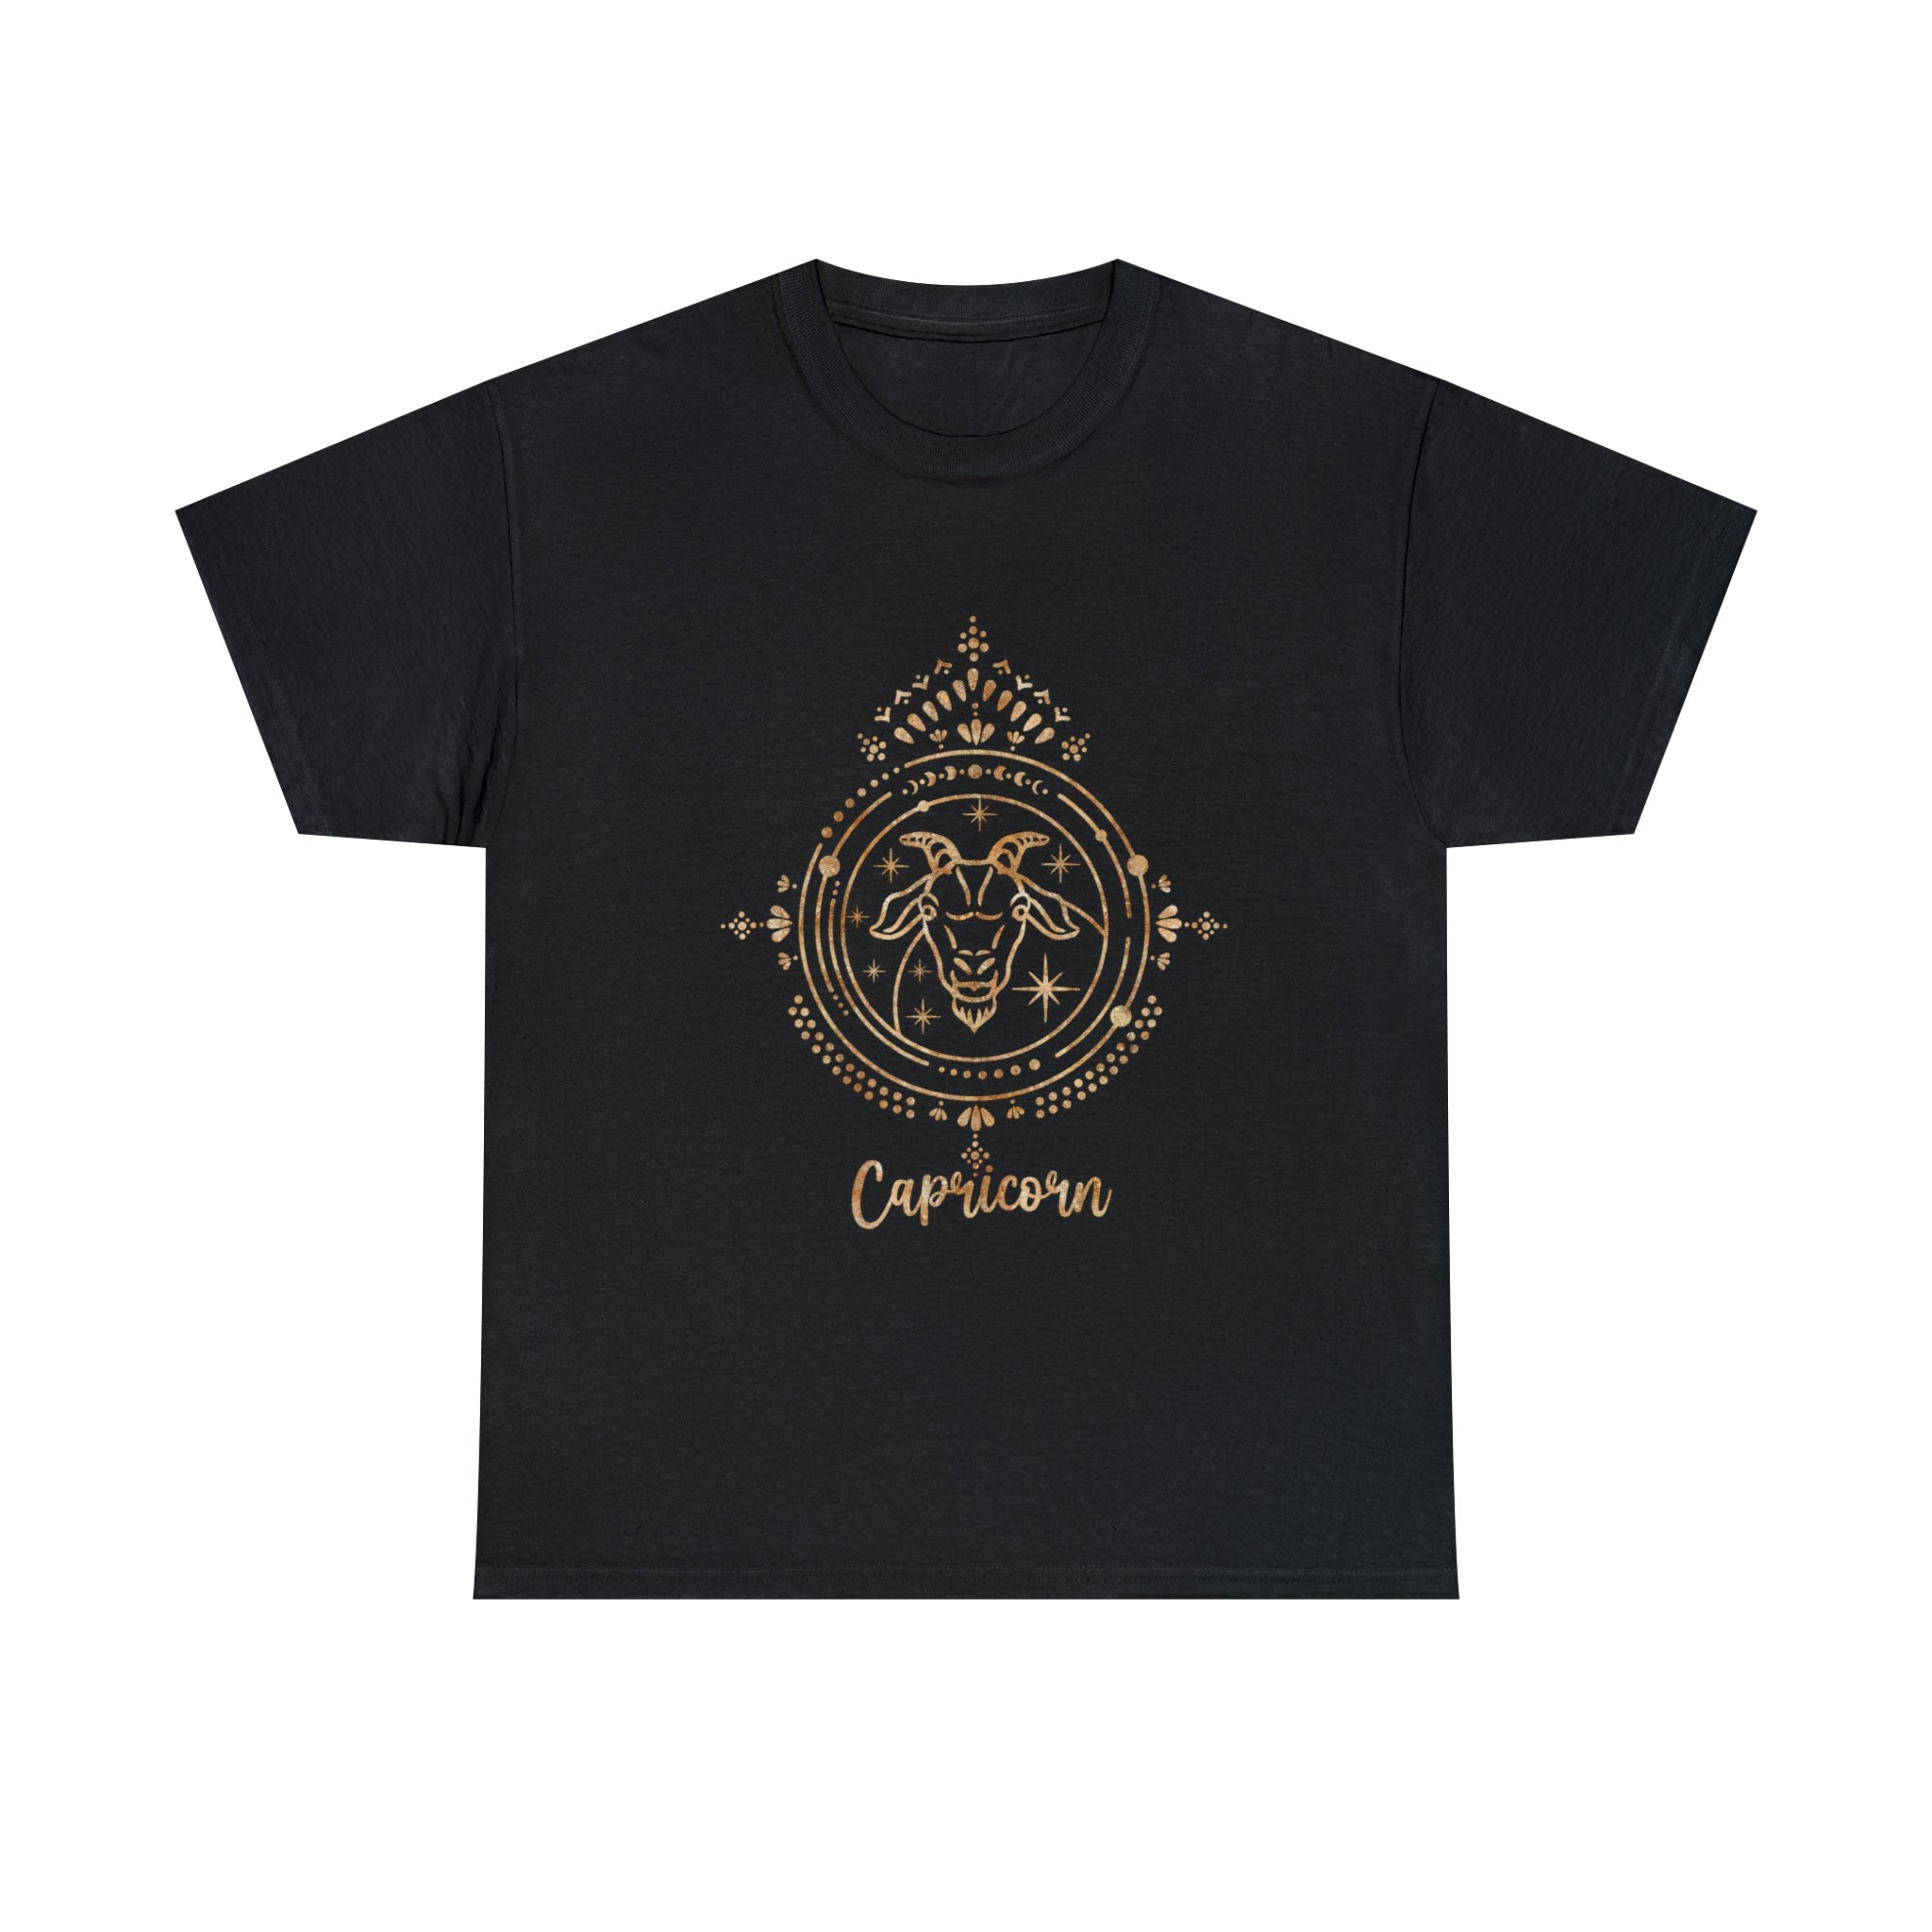 A Capricorn black t-shirt with a gold lion on it.